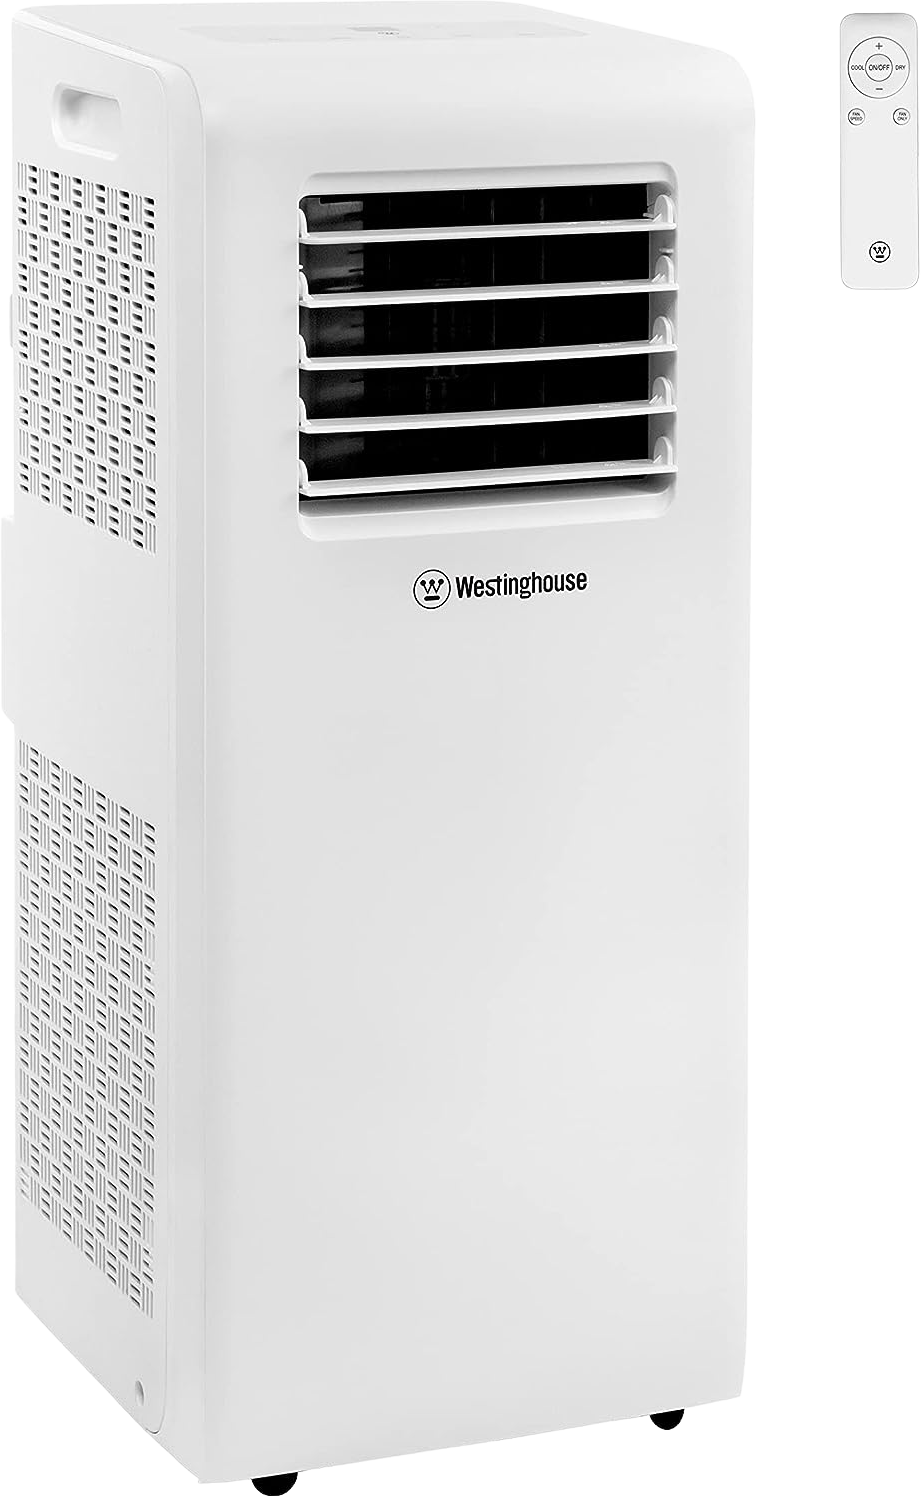 Westinghouse, Westinghouse 10,000 BTU Portable Air Conditioner with Remote 3-in-1 For Rooms Up to 300 sq. ft. WPAC10000 White New